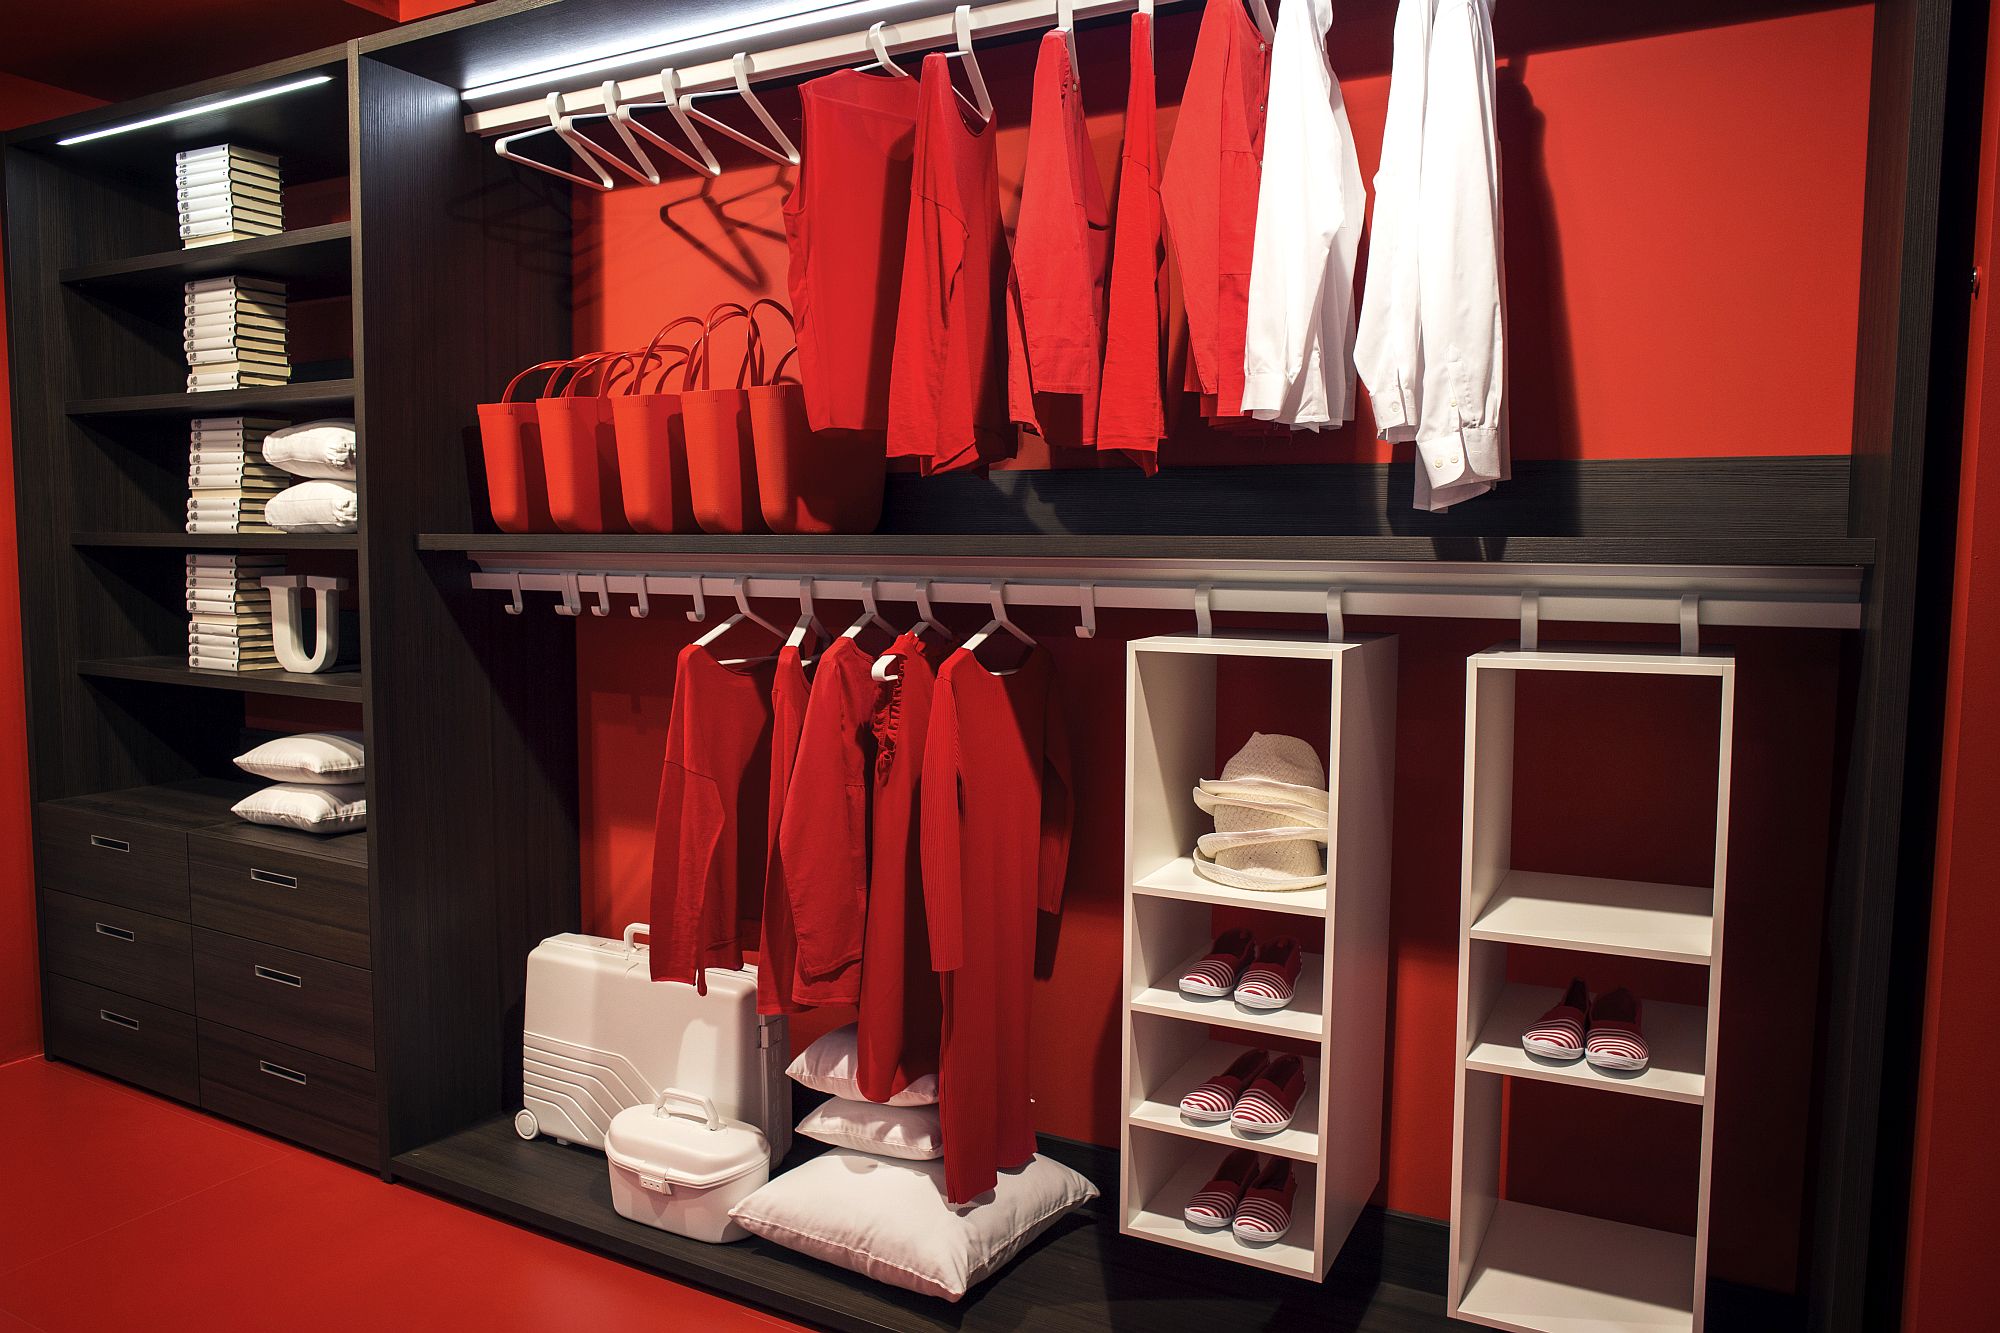 Open-wooden-closet-in-red-and-black-offers-plenty-of-space-for-your-entire-wardrobe